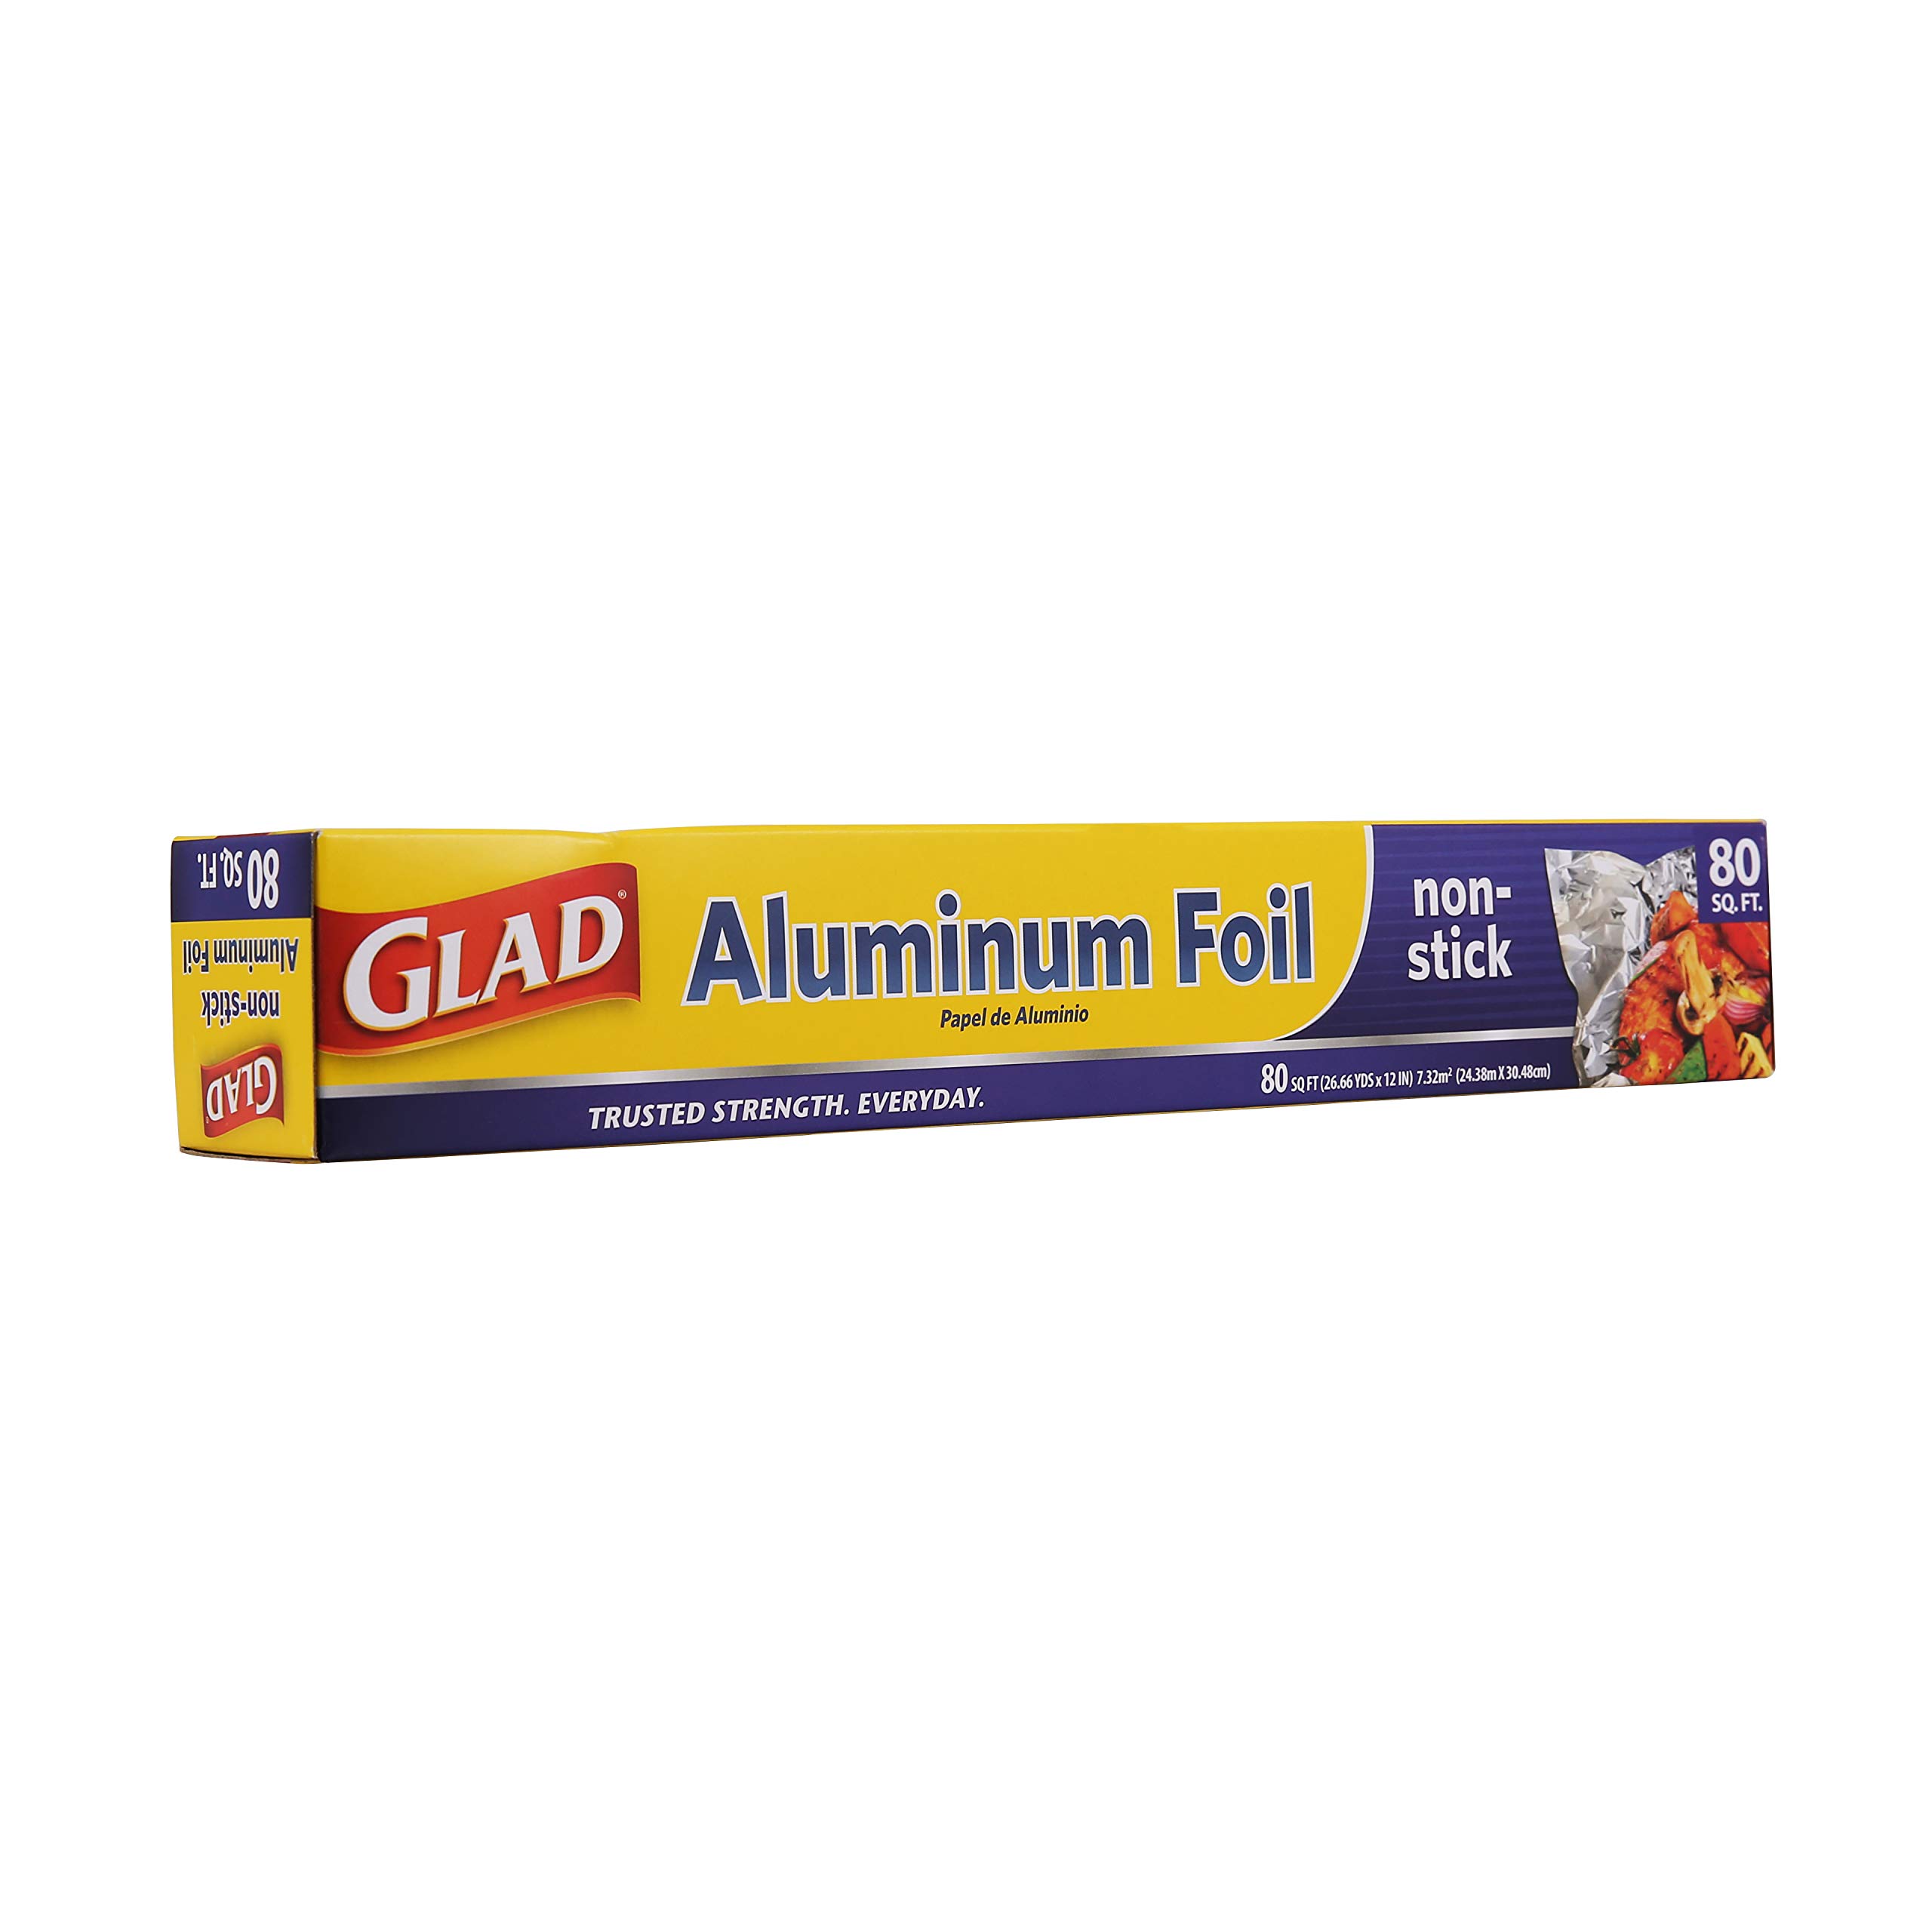 Non-Stick Aluminum Foil, Multiuse Foil for Ultimate Food Protection | Aluminum Foil for Grilling, Roasting, Baking | Glad Grilling and Baking